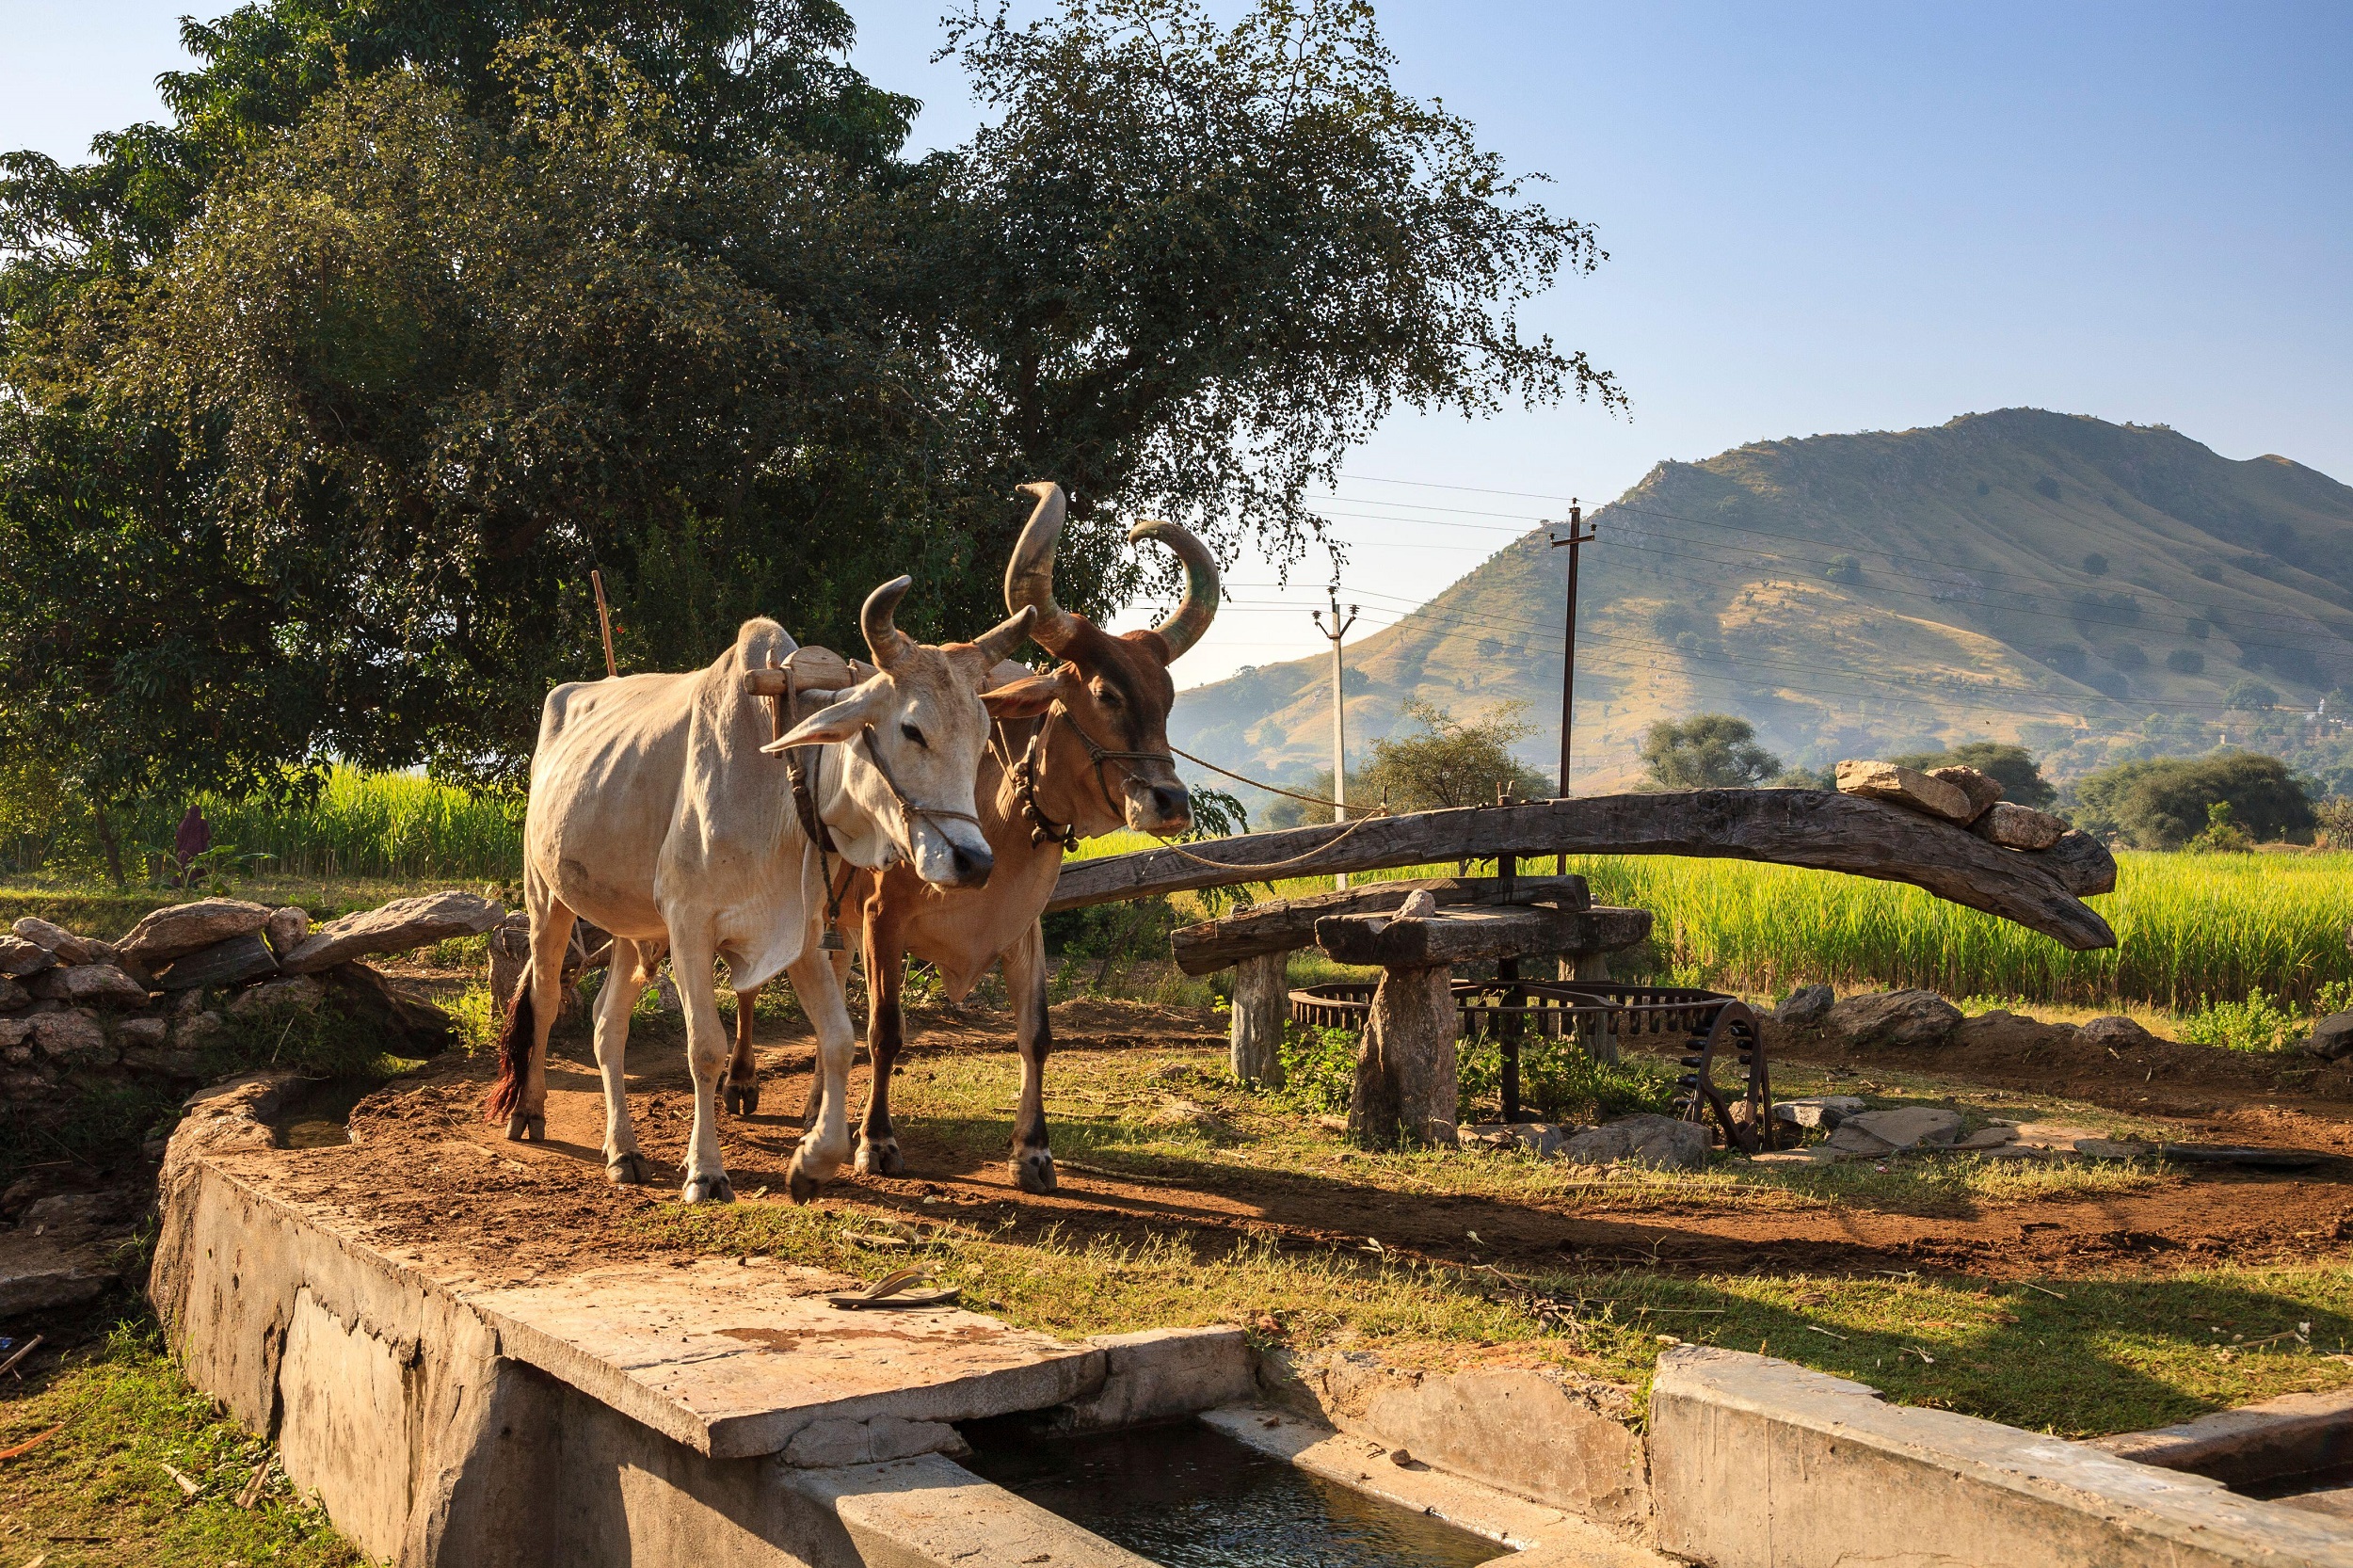 Indian cattle driving a water pump in rural Rajasthan, India [image: Alamy]